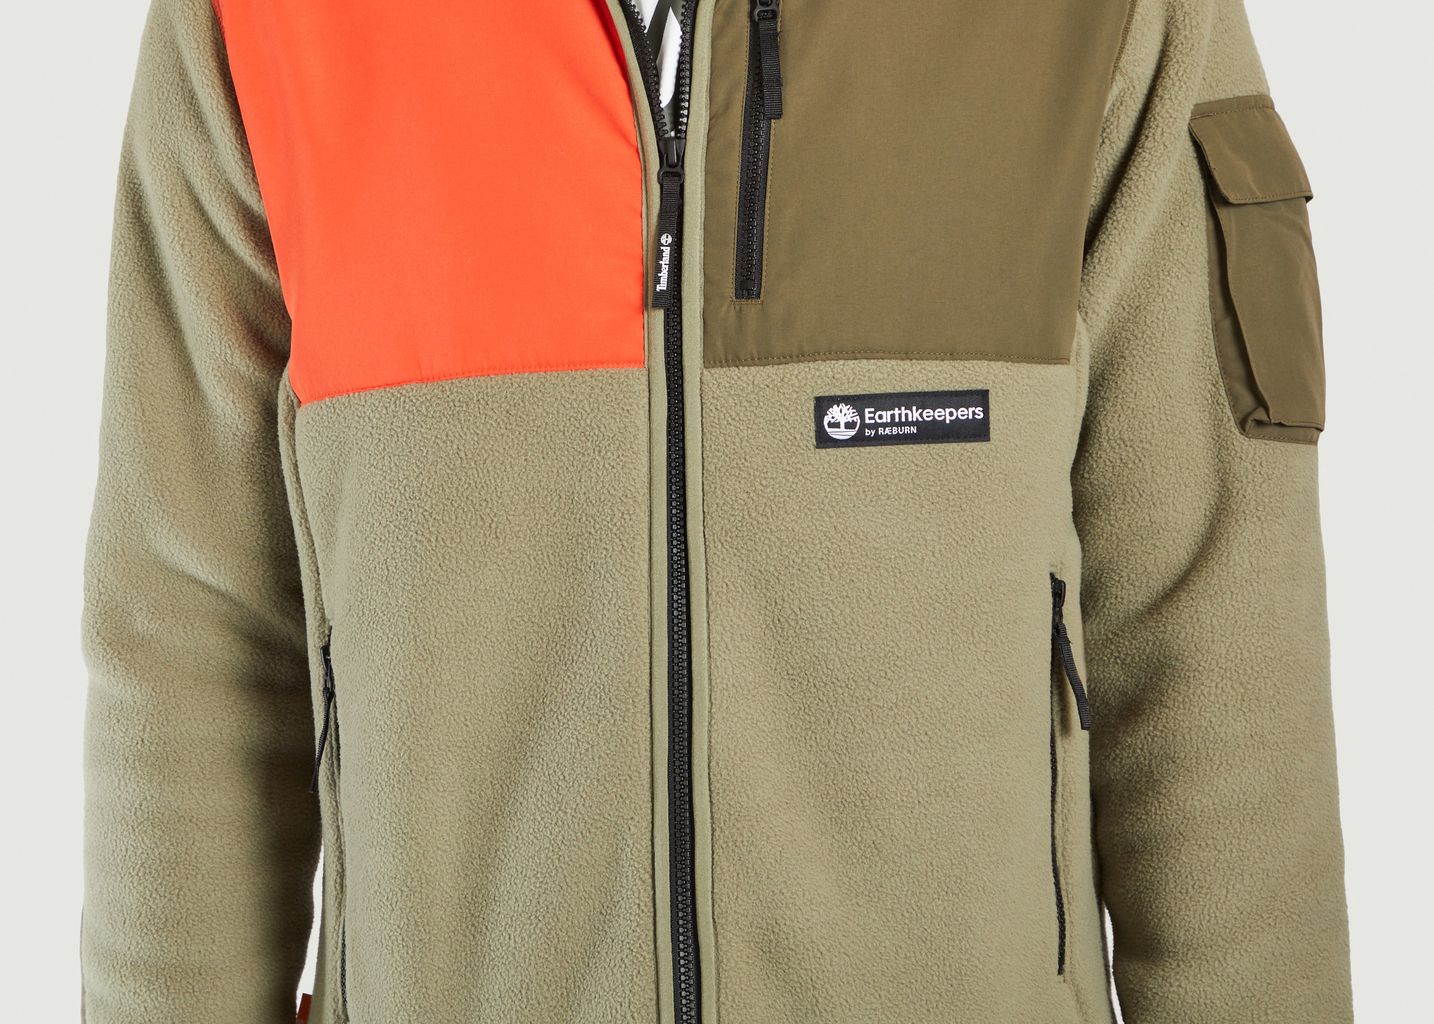 Veste en polaire recyclée Earthkeepers® - Timberland